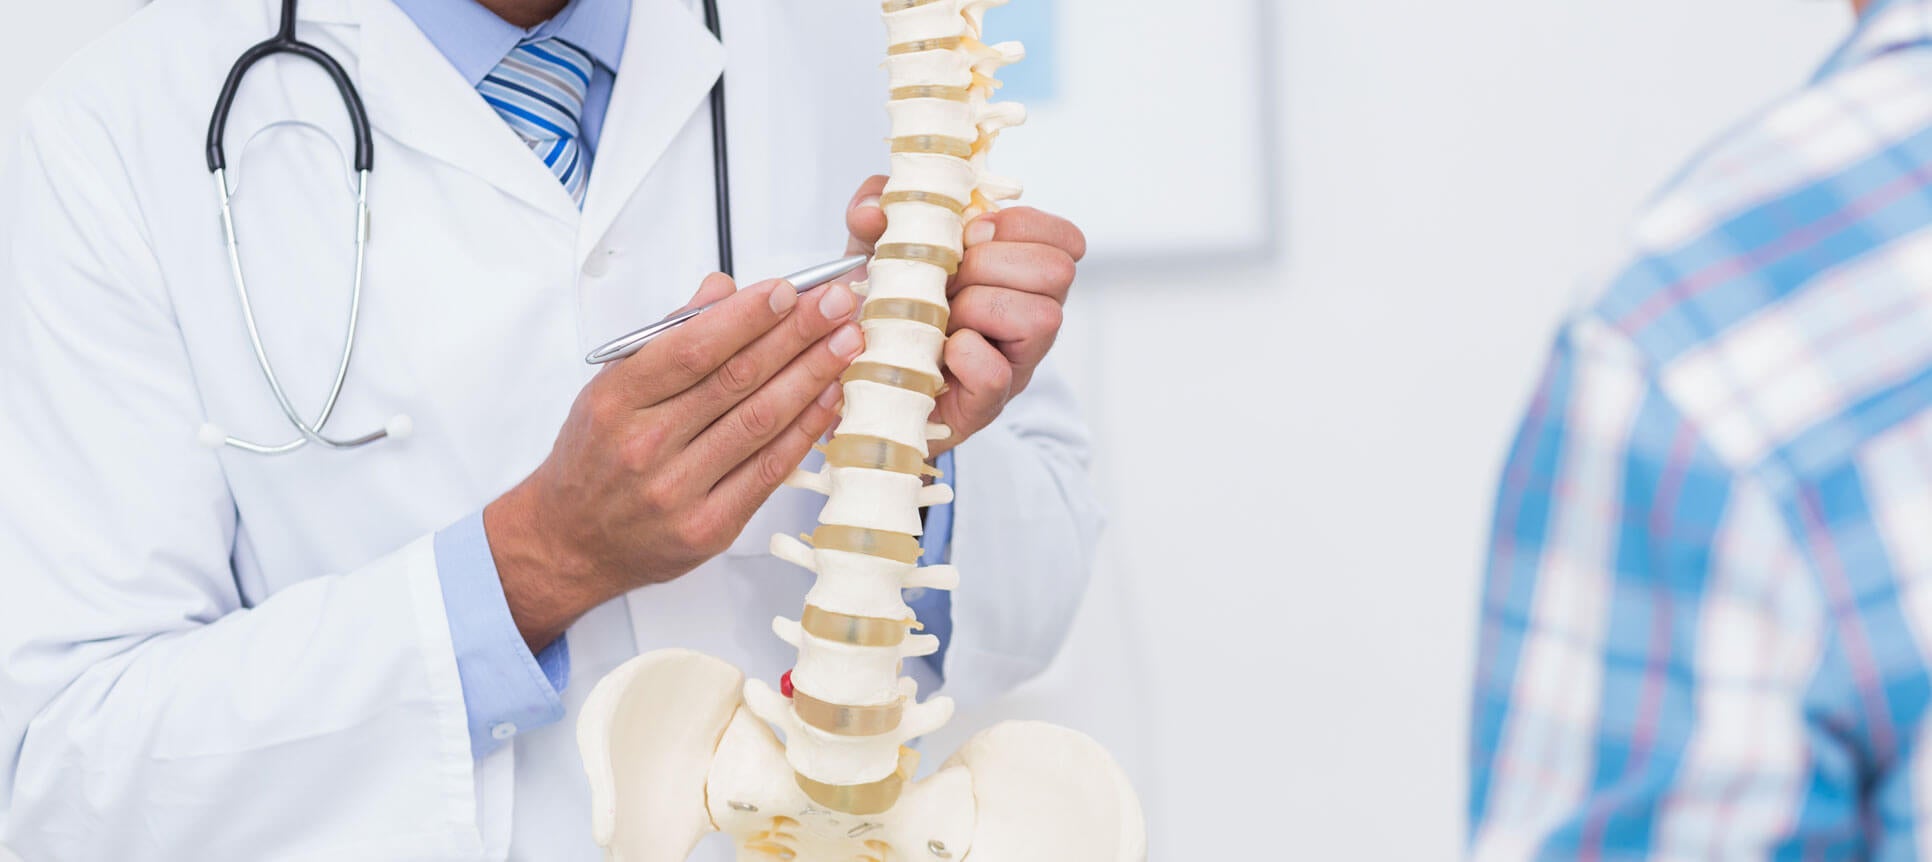 chiropractor explaining the human spine to patient